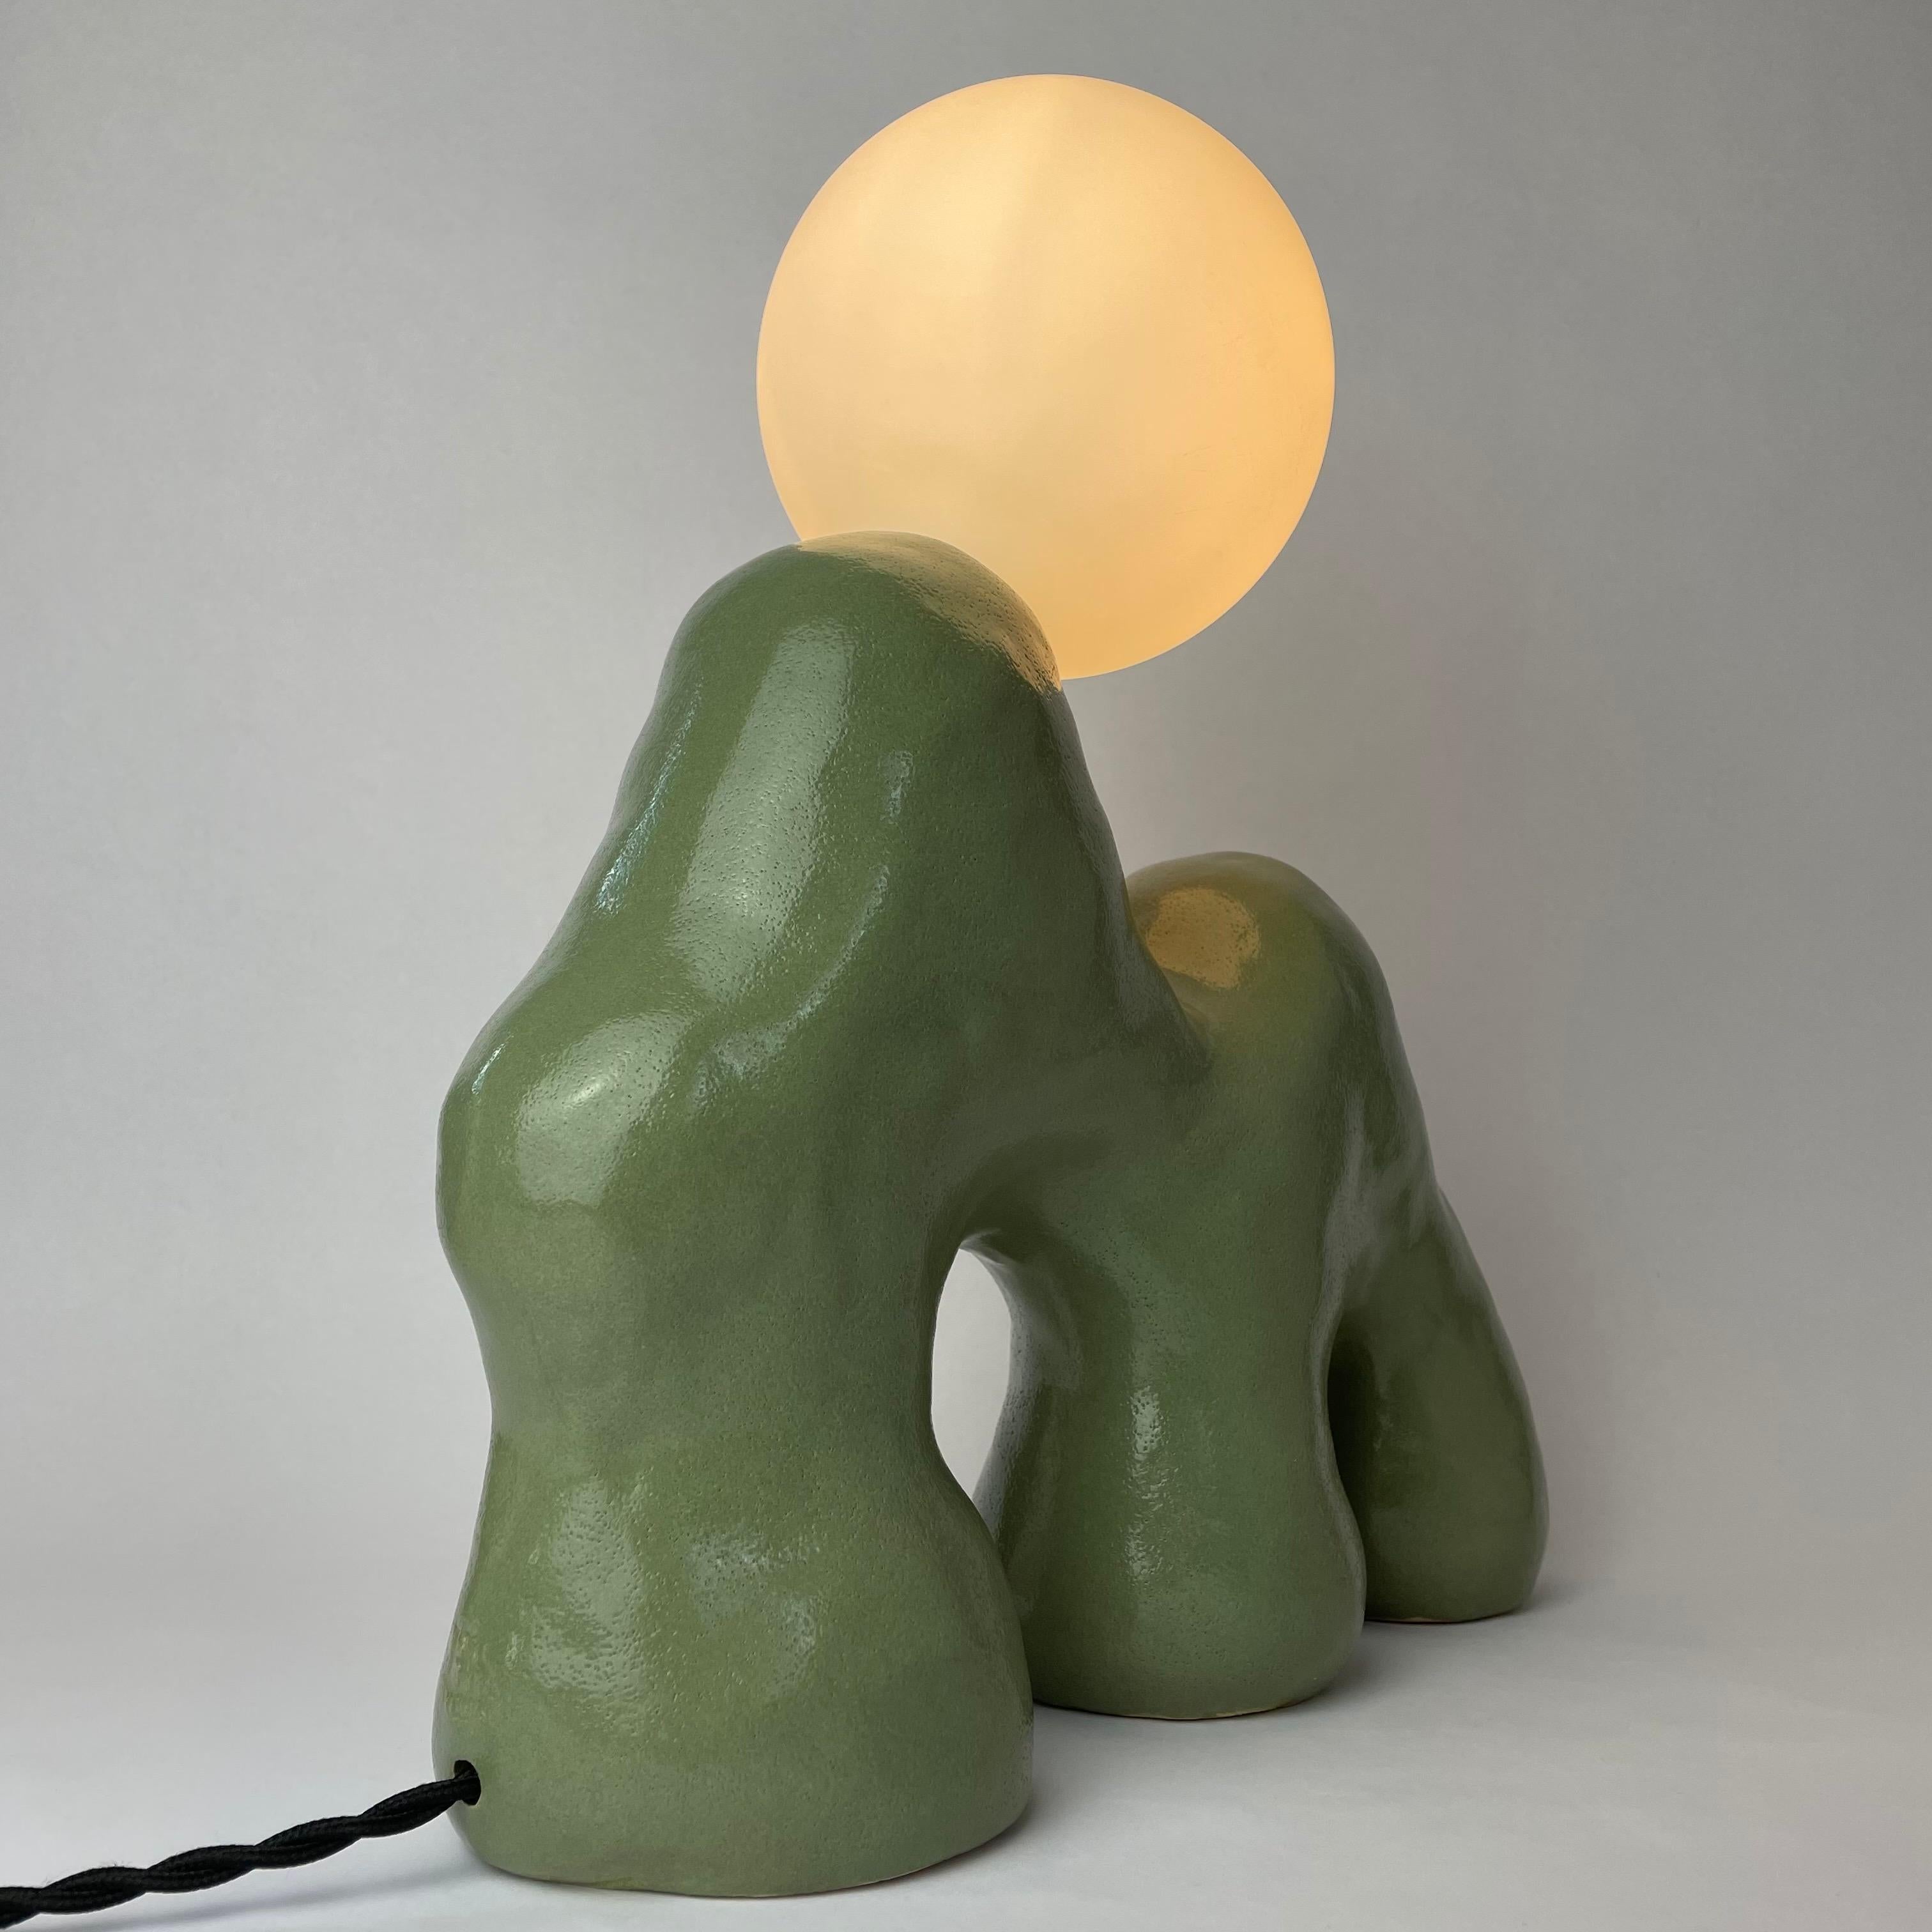 Painted Tropic Lamp by HS Studio